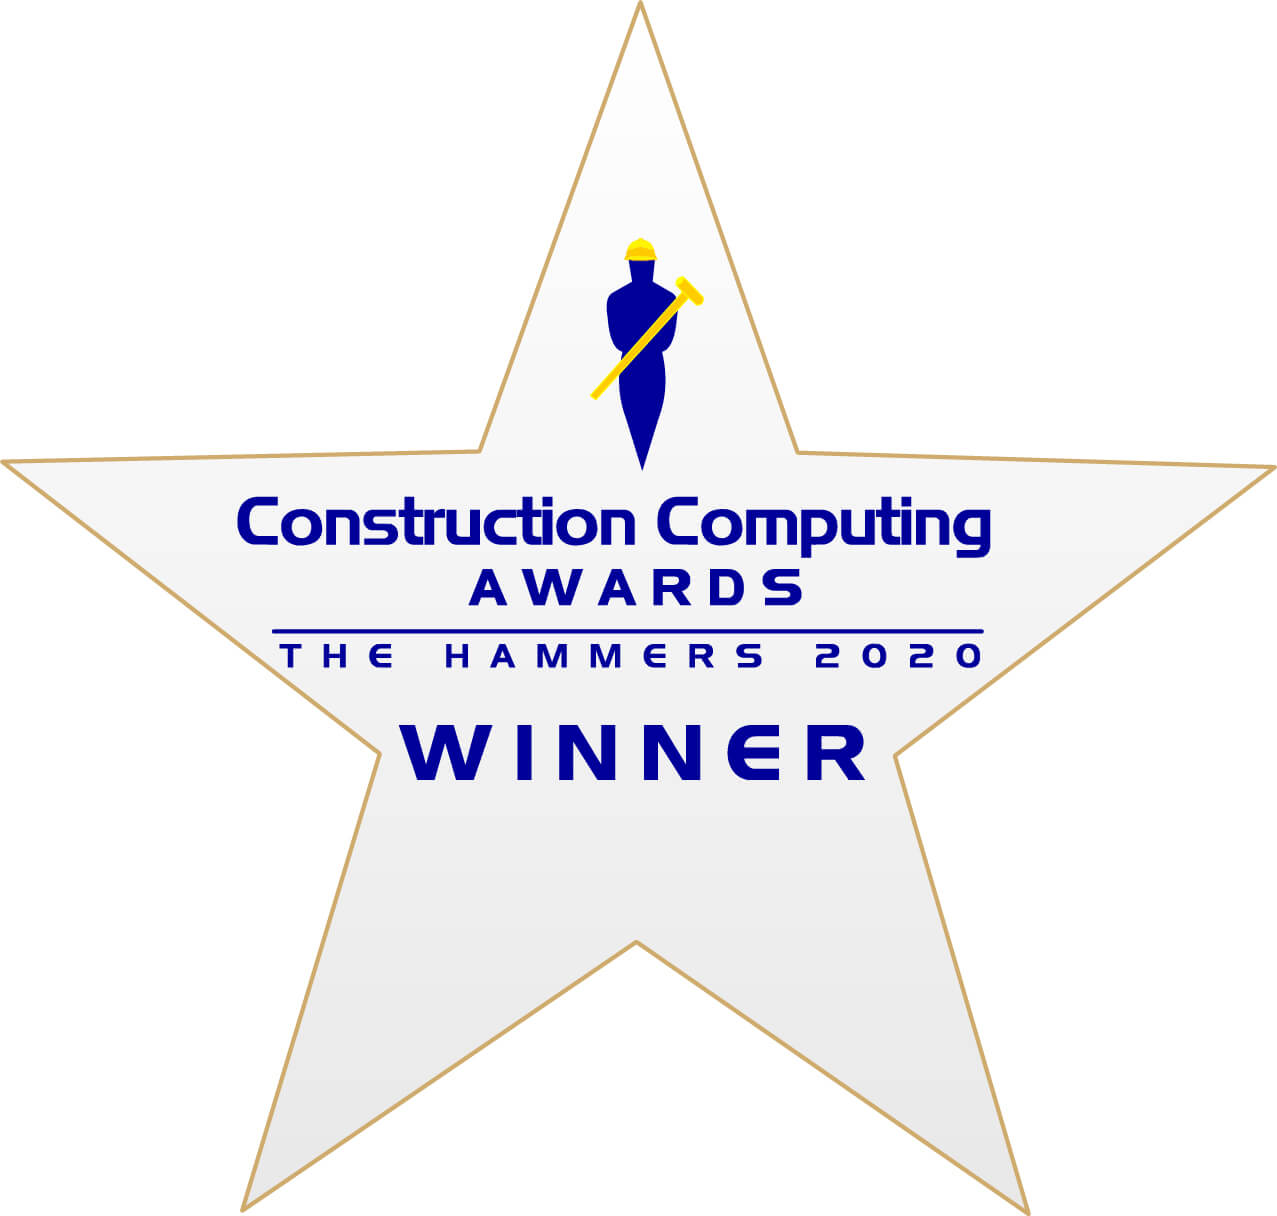 Graphisoft Archicad Wins ‘BIM Product of the Year’ Tenth Year in a Row